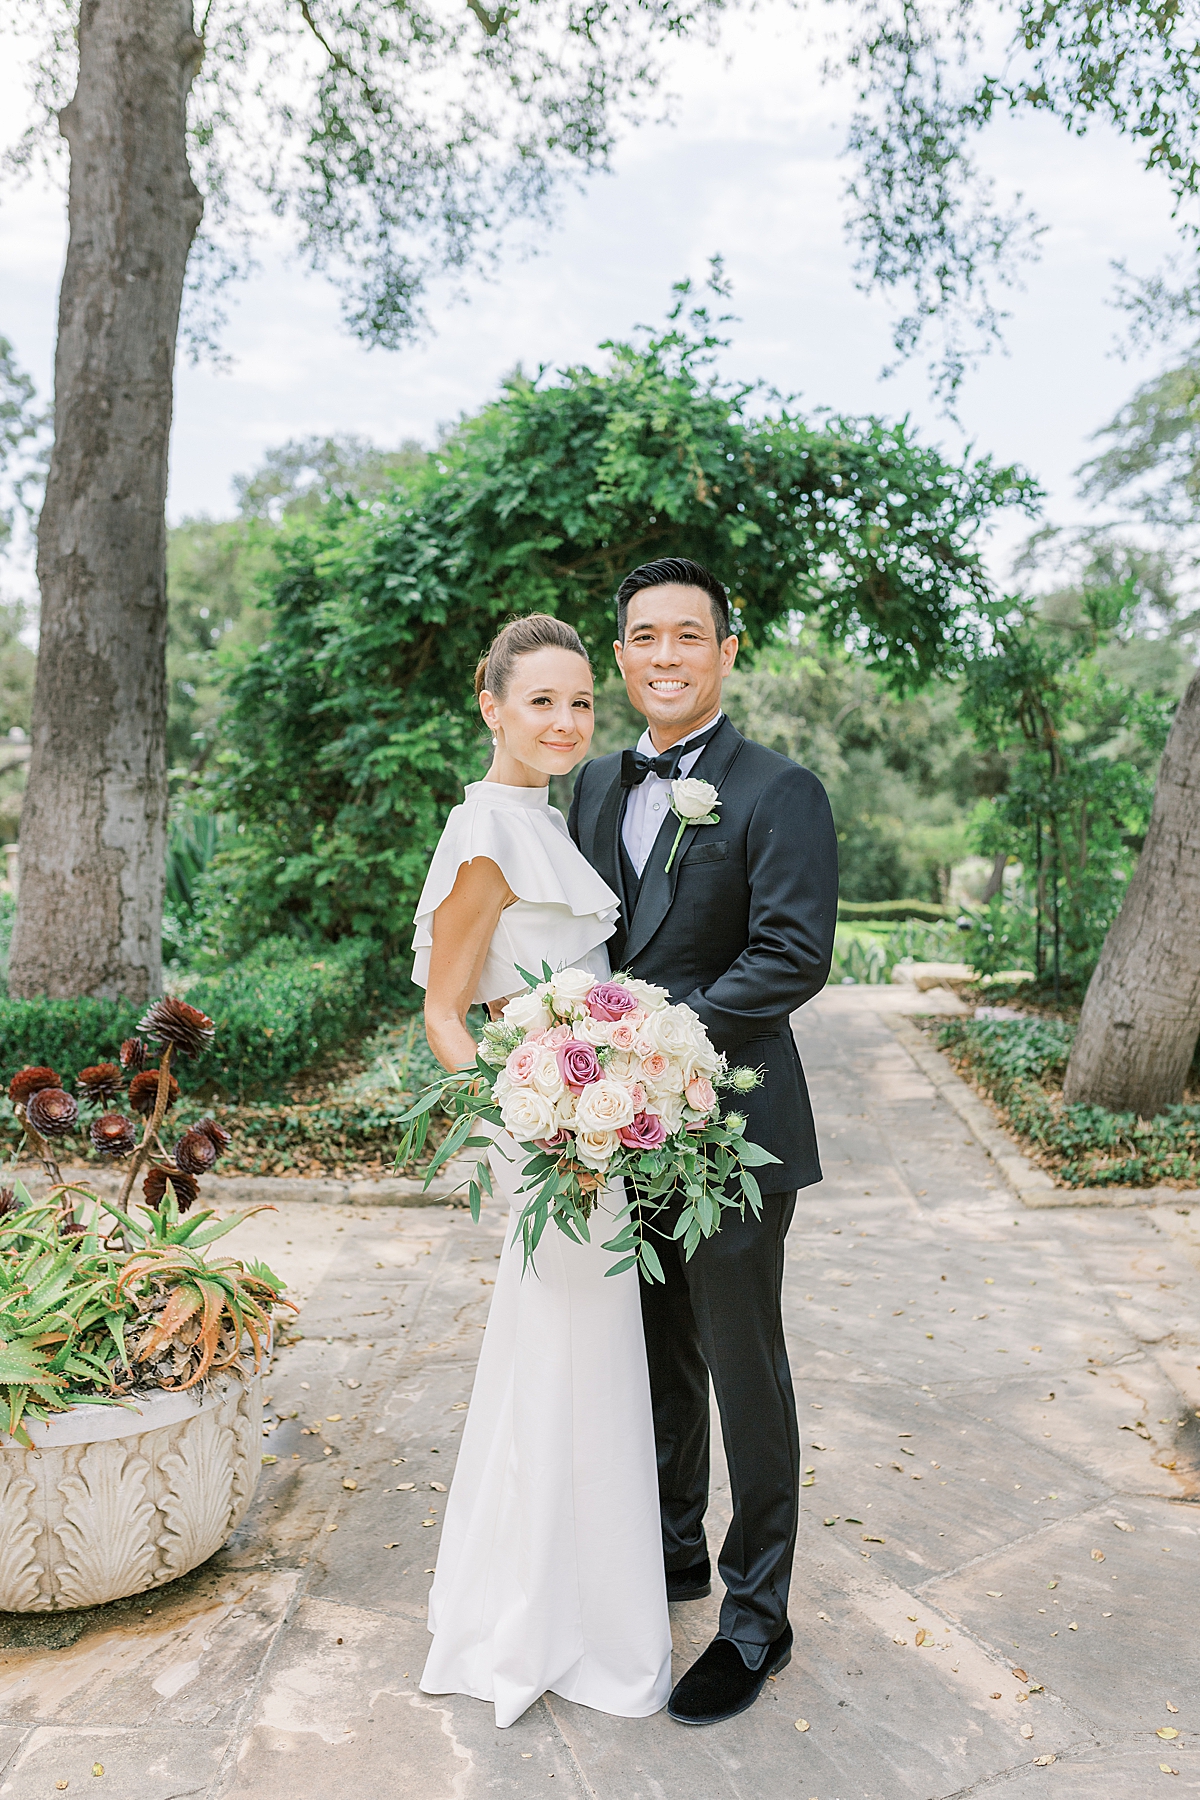 The couple's last few portraits as bride and groom before their Montecito Church Wedding ceremony.